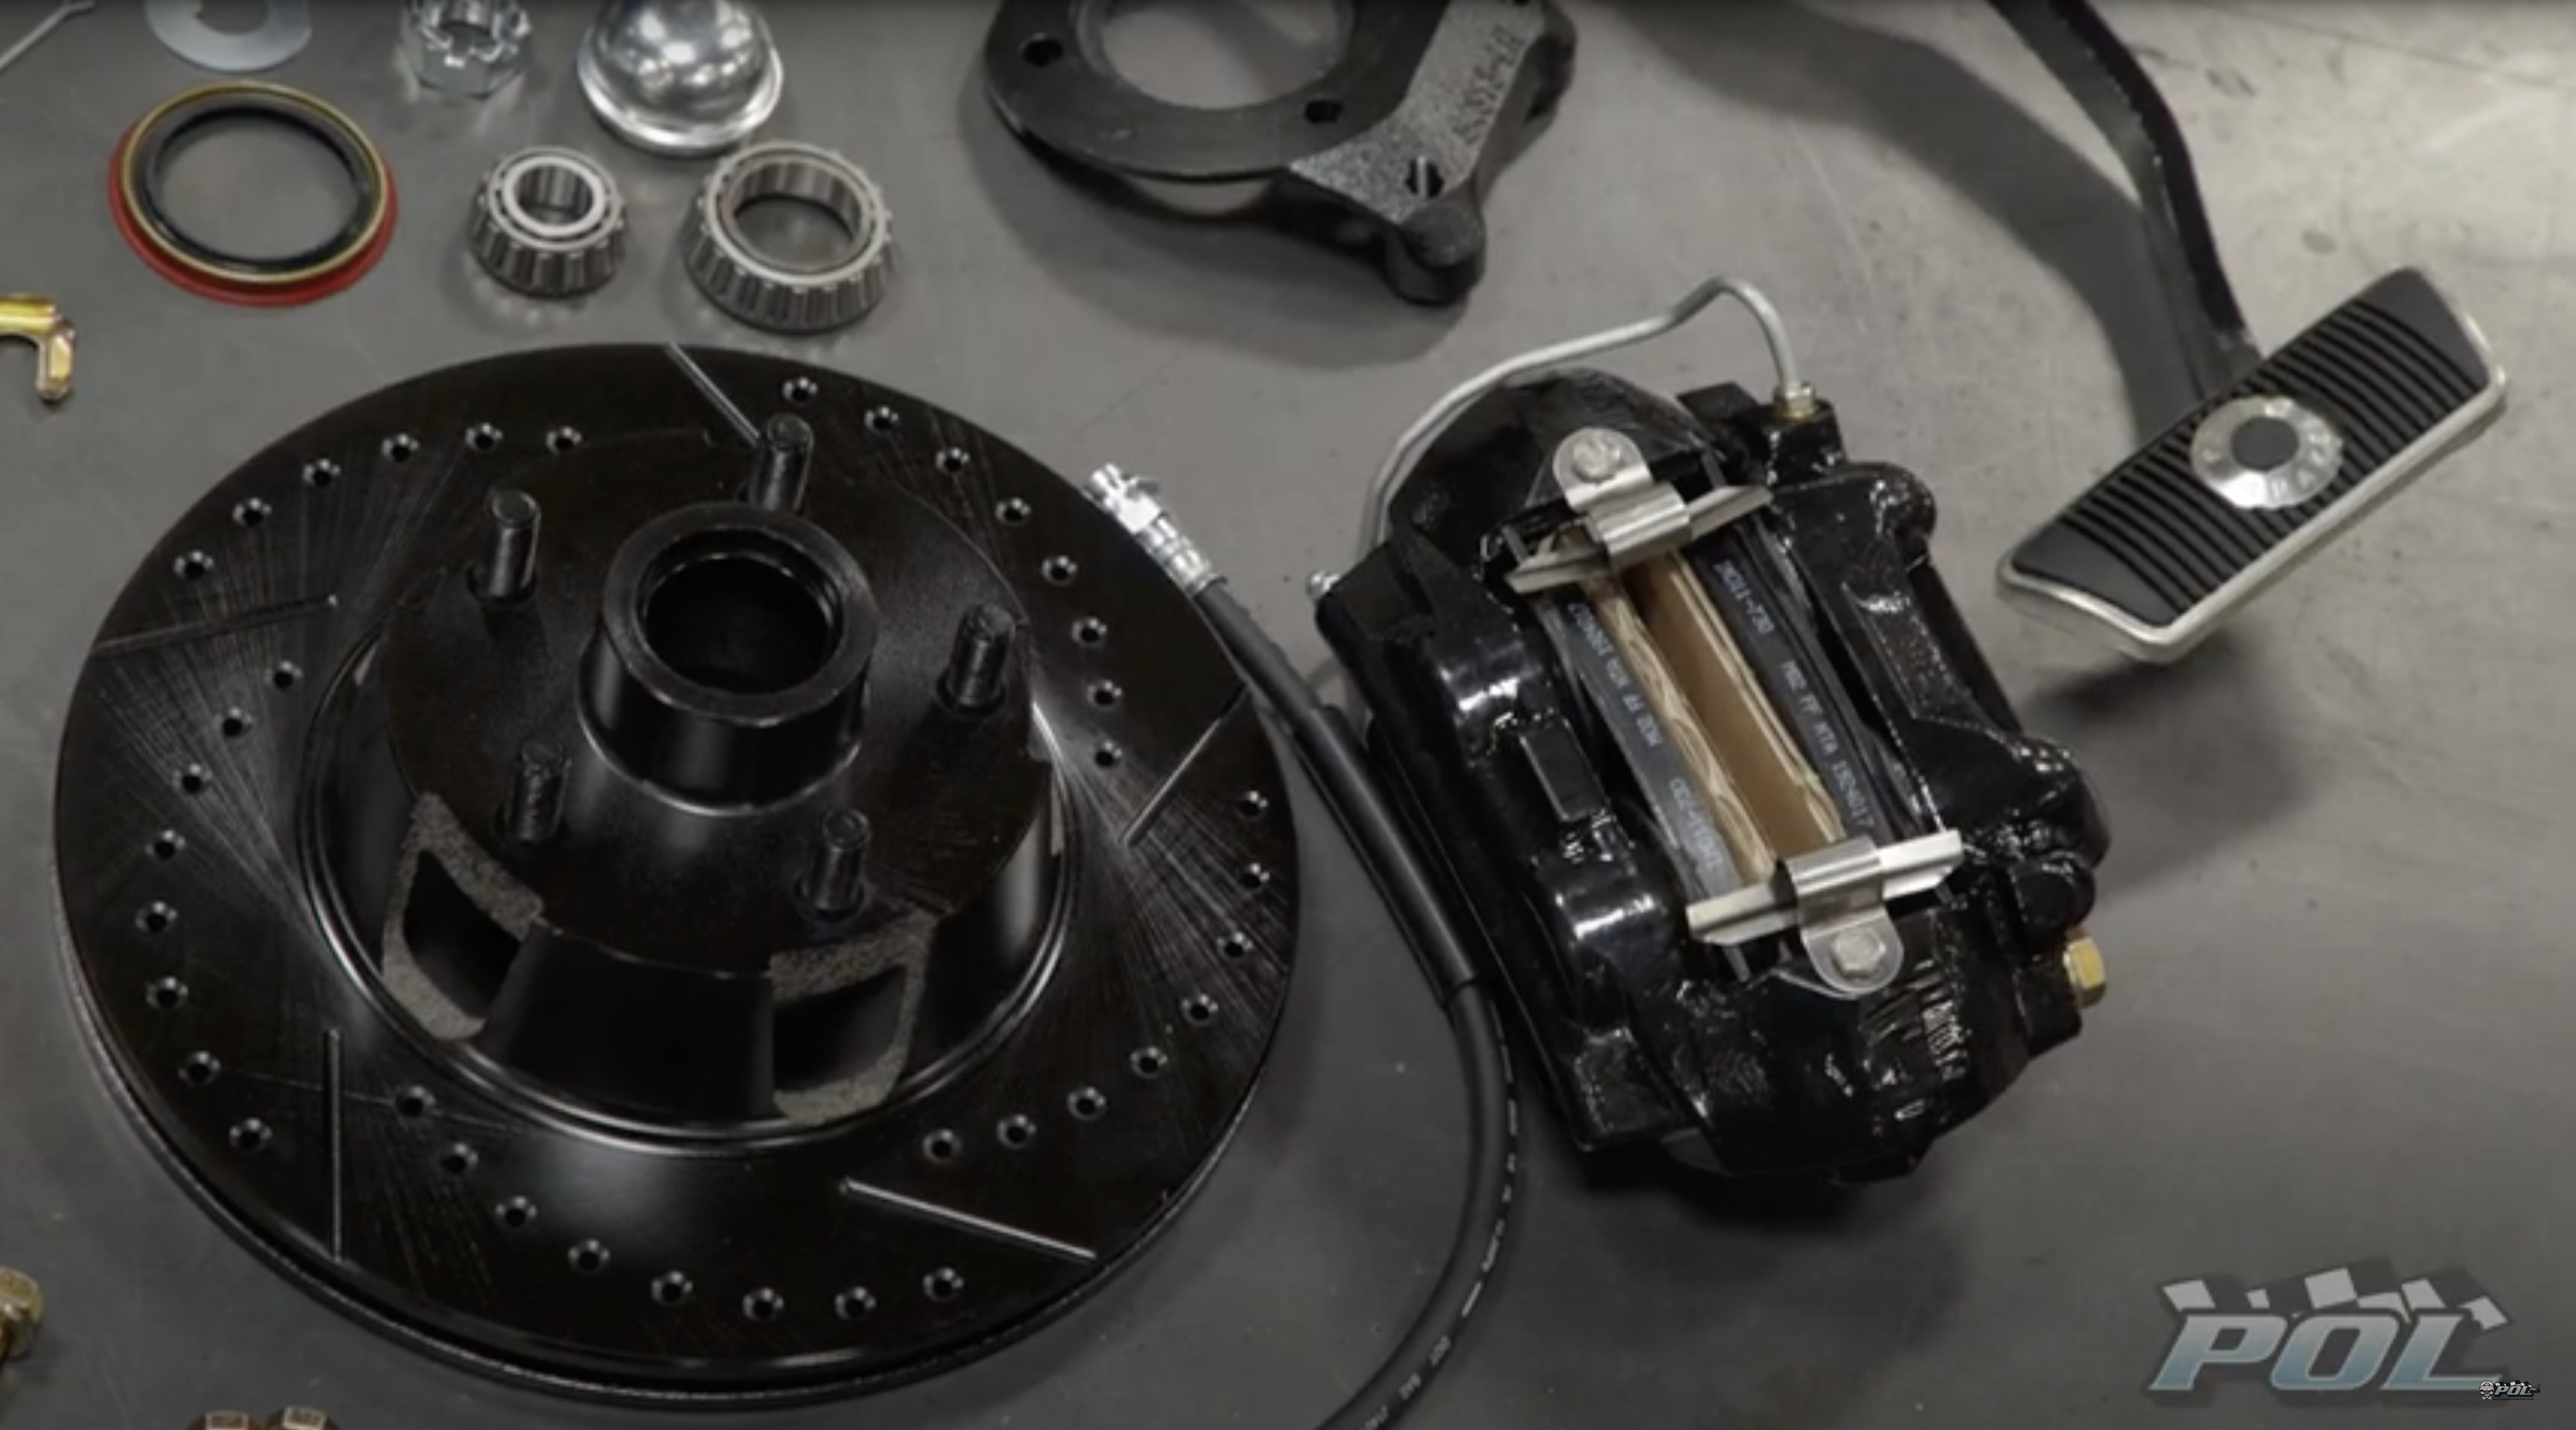 How To Install Blackout Power Disc Brakes on a ’67 Mustang by POL & Wilwood – DIY Upgrade